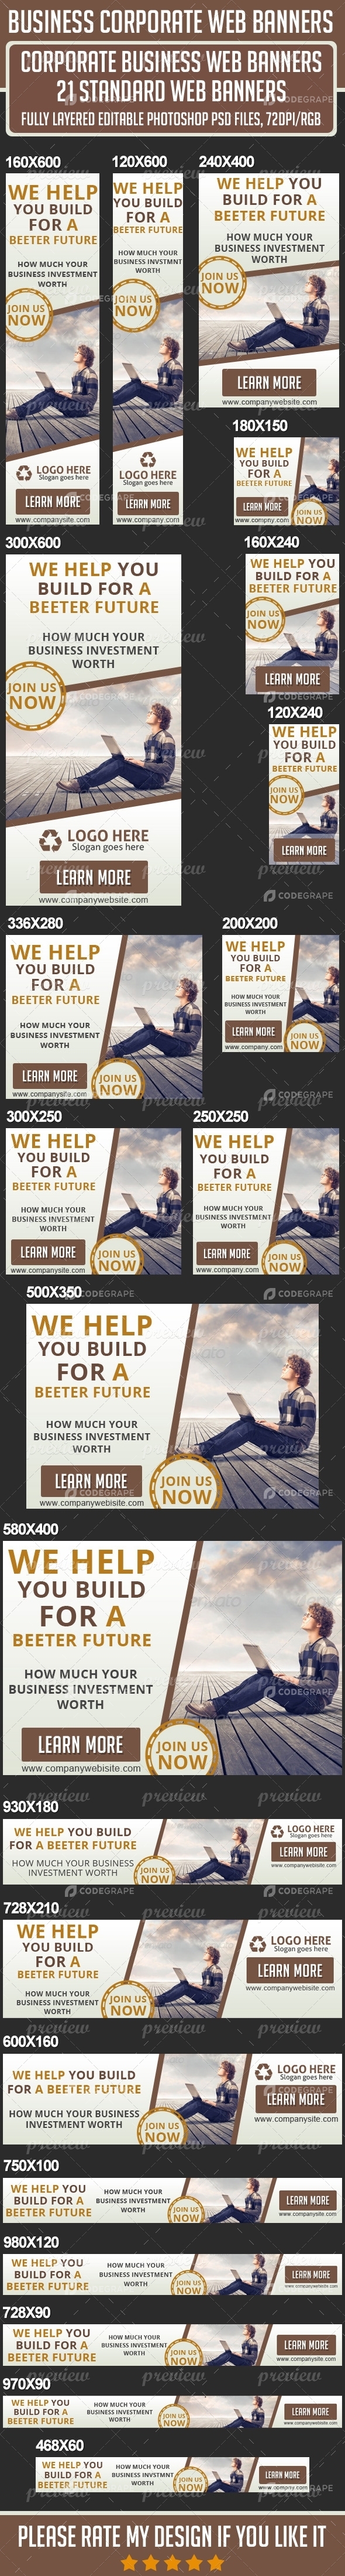 Corporate Business Web Banners